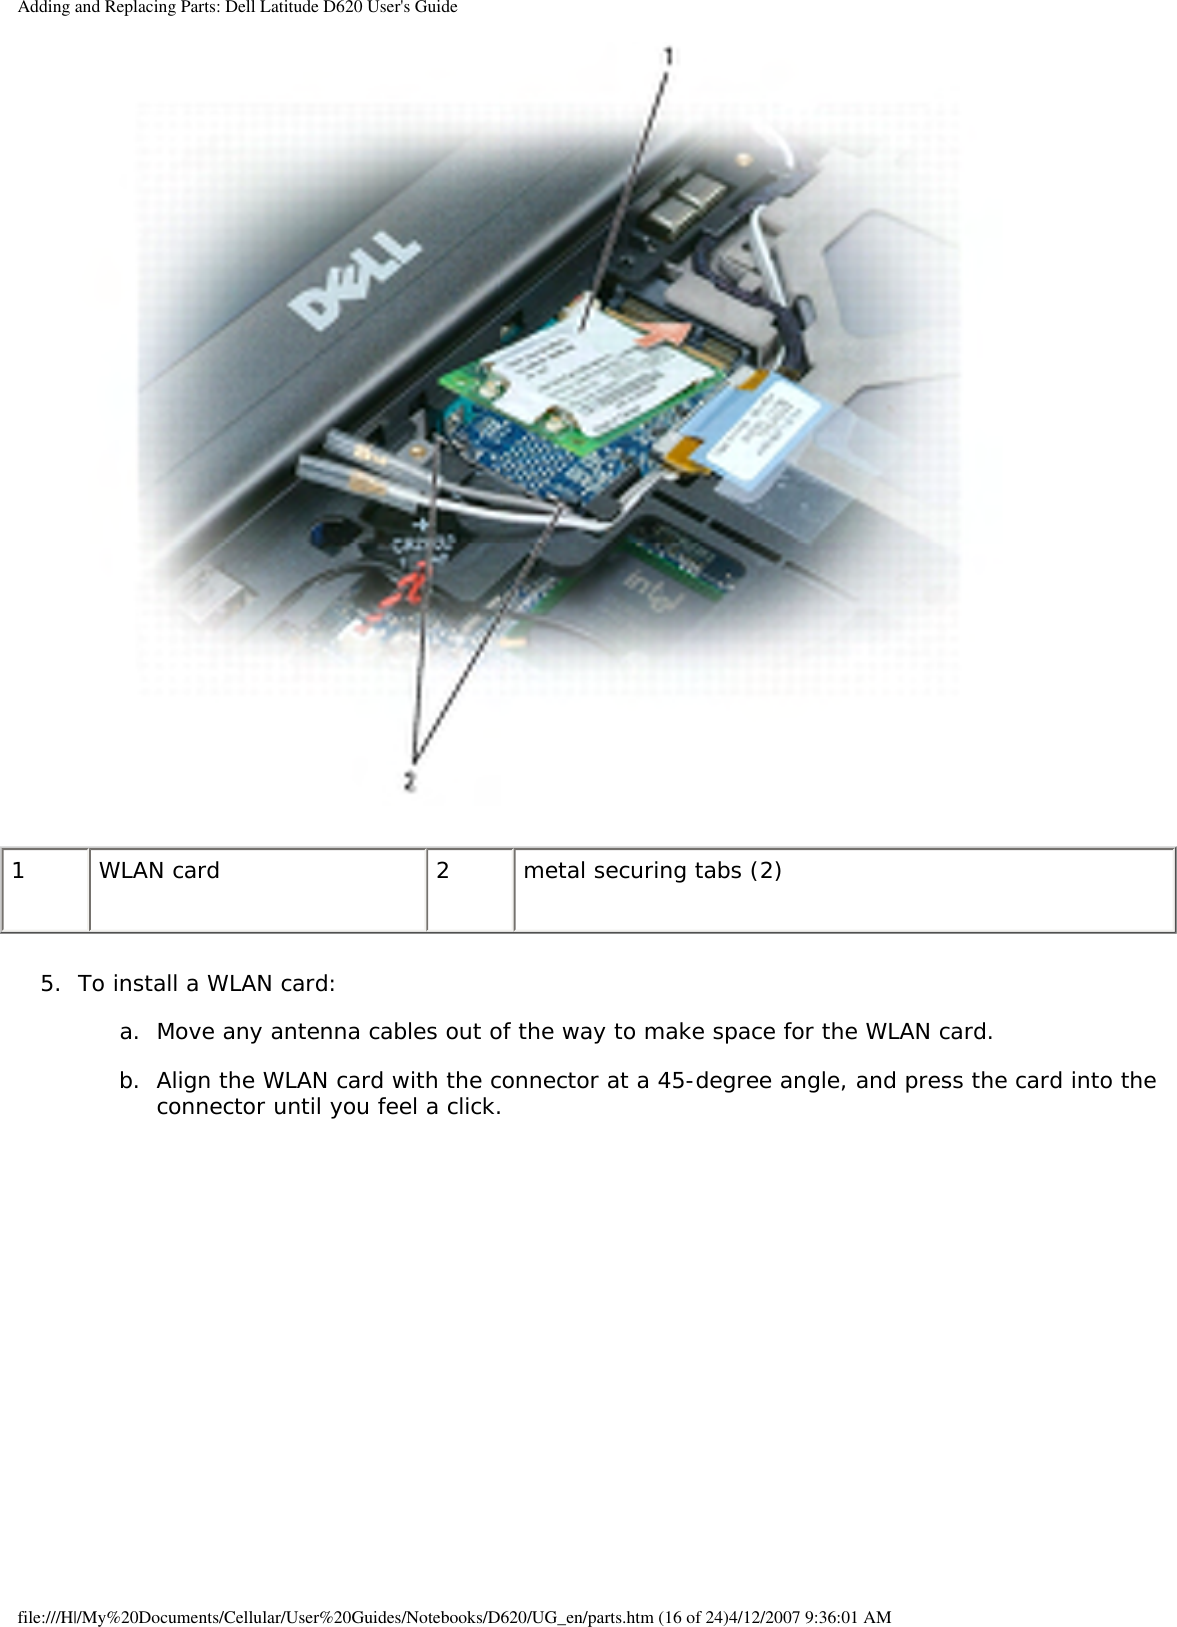 Adding and Replacing Parts: Dell Latitude D620 User&apos;s Guide 1 WLAN card 2 metal securing tabs (2)5.  To install a WLAN card:   a.  Move any antenna cables out of the way to make space for the WLAN card.   b.  Align the WLAN card with the connector at a 45-degree angle, and press the card into the connector until you feel a click.   file:///H|/My%20Documents/Cellular/User%20Guides/Notebooks/D620/UG_en/parts.htm (16 of 24)4/12/2007 9:36:01 AM